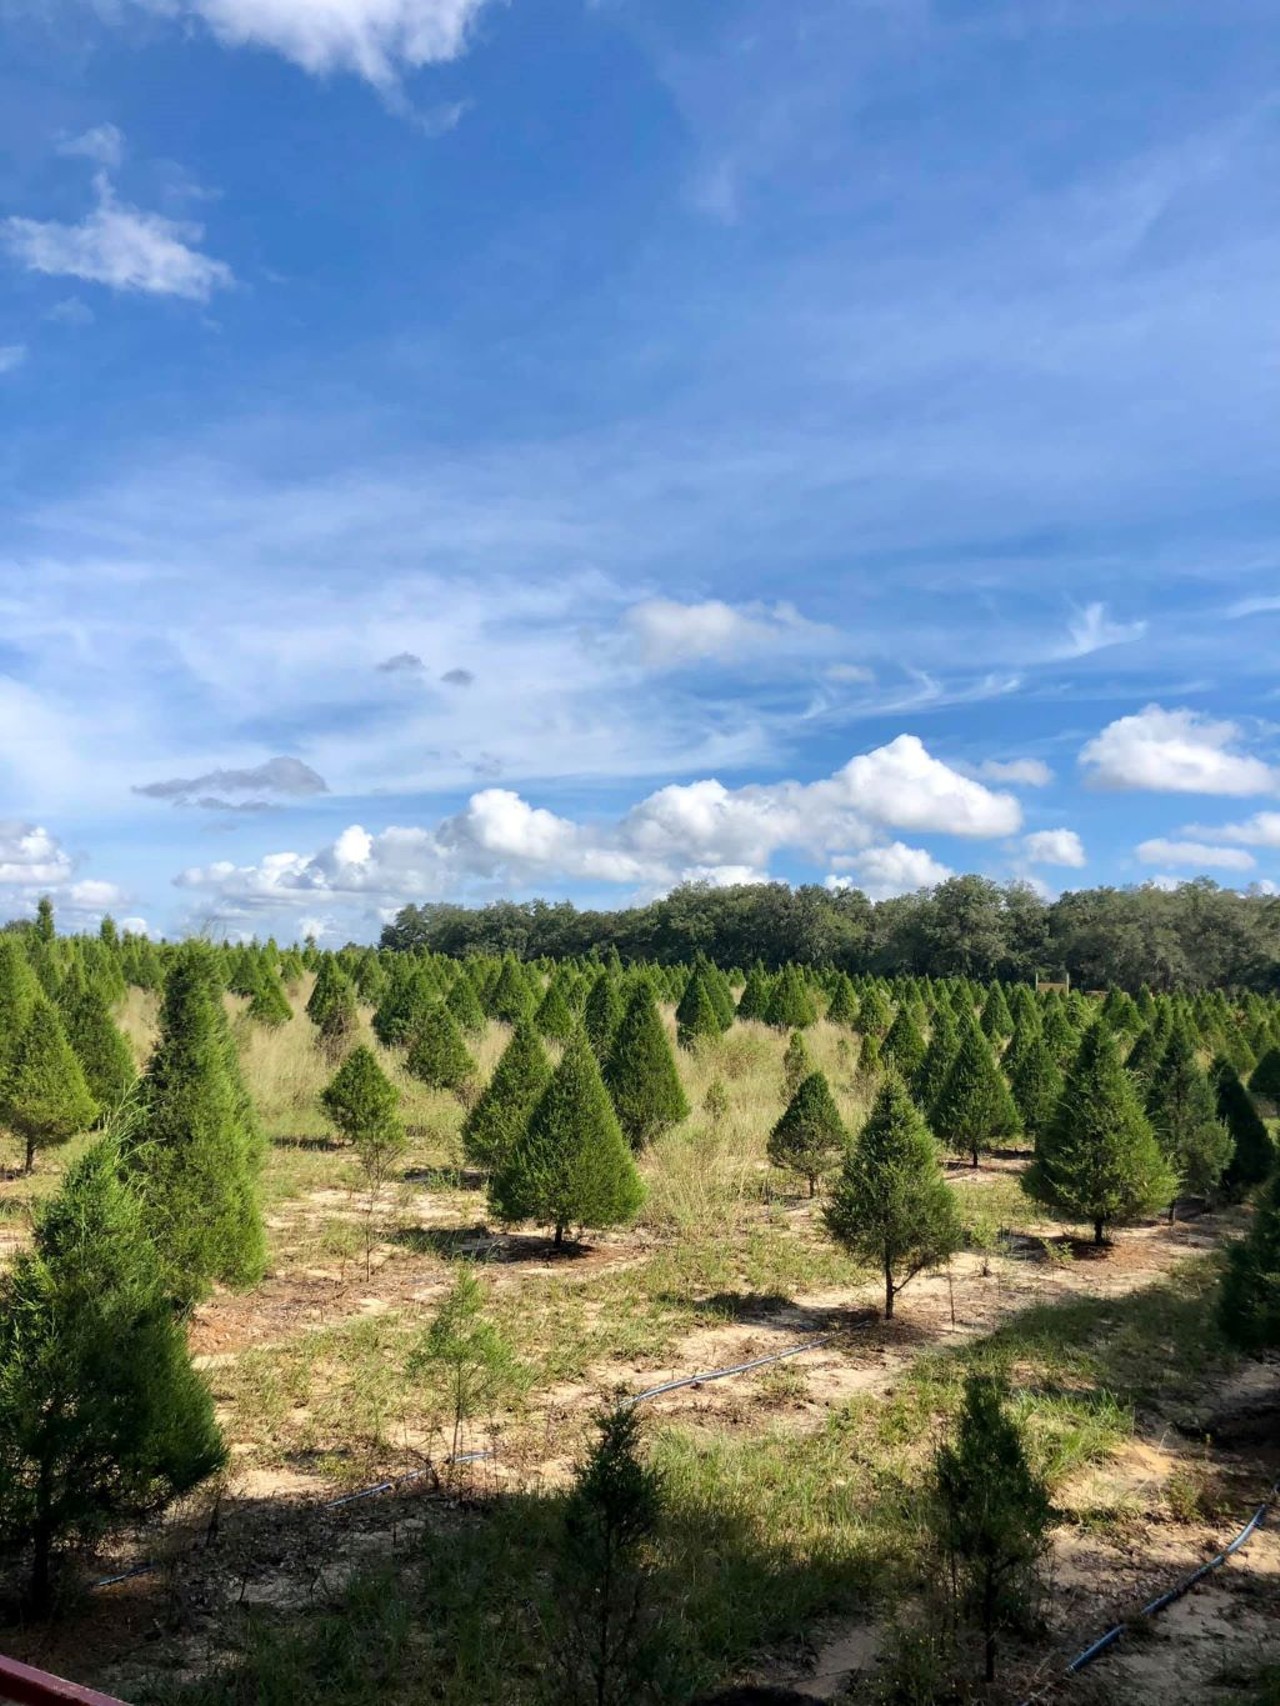 Santa's Christmas Tree Forest 
35317 Huff Road, Eustis
Dates open: Nov. 19 through Dec.18, 10 a.m. to 5 p.m.
Cost: Admission to the farm begins at $7 and goes up from there depending on activity, age 2 and under are free. Christmas tree prices: $40-$350
Take your pick of pre-cut trees and U-cut Florida trees that come in all sizes. Admission tickets are required for all guests visiting the farm. Make sure to get your tickets early online. Visit with Santa on certain dates.